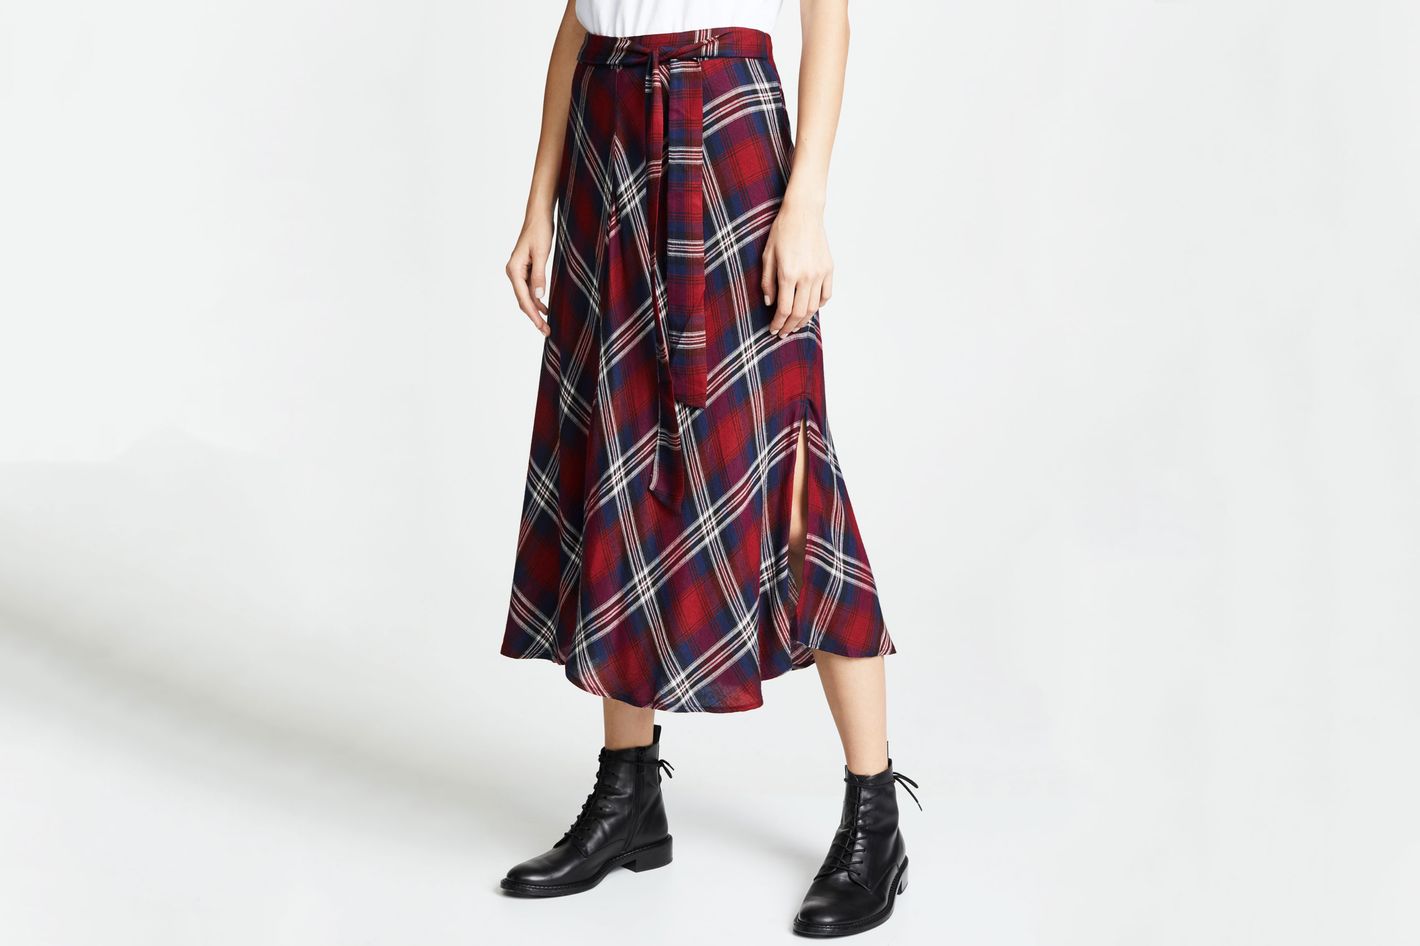 Plaid Skirts to Wear to a Christmas Party